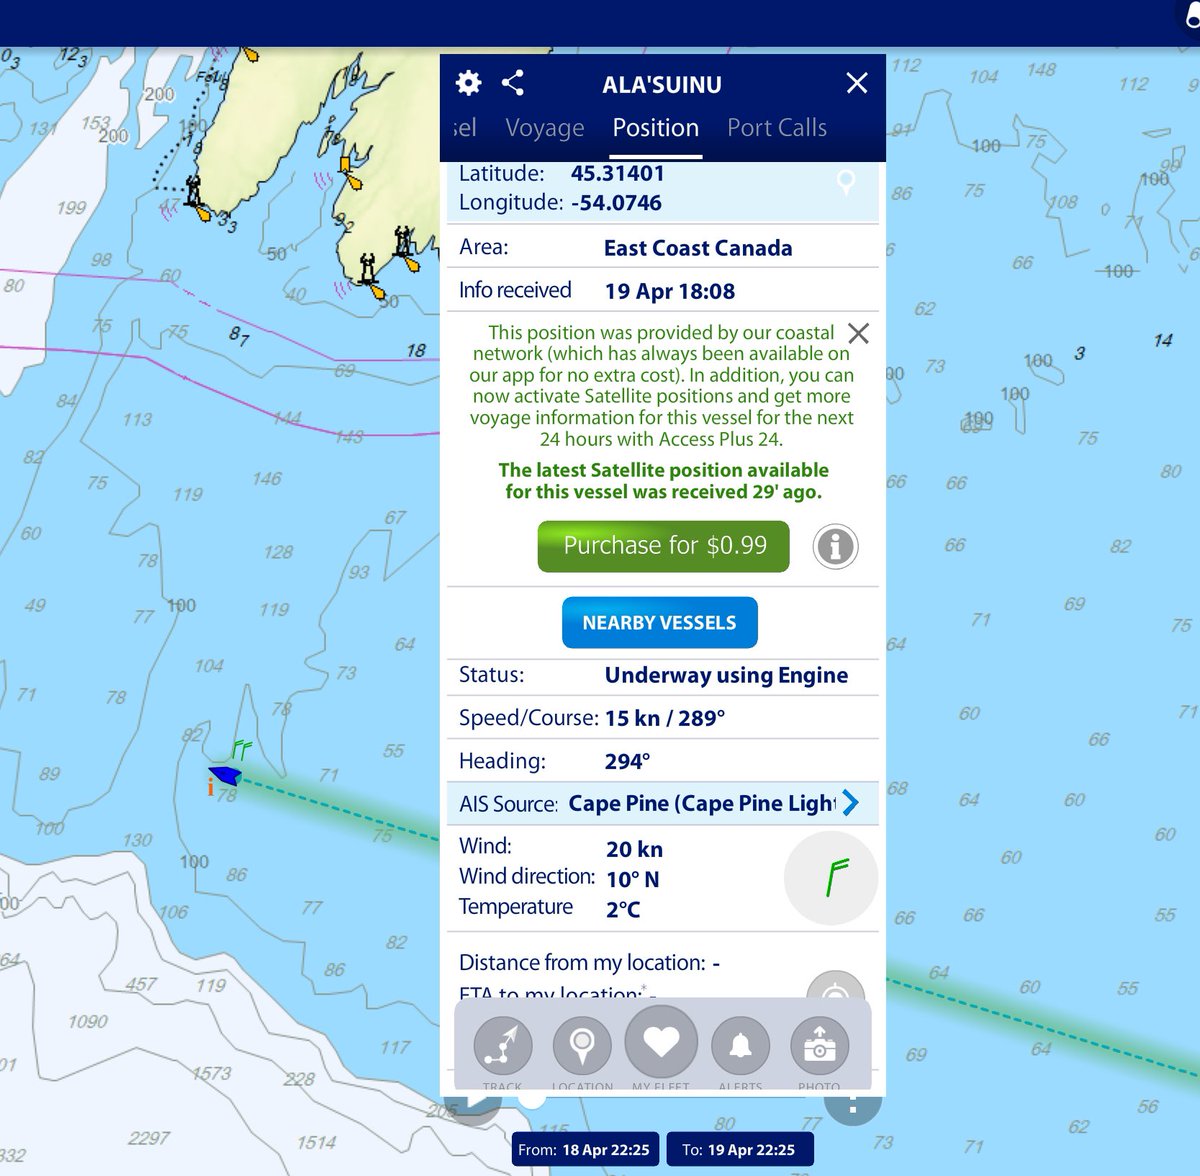 The newest @MAferries MV Ala’suinu nearing Canadian waters for the first time. Voyage from China. Now 80miles S of Cape Pine. @MarineTraffic AIS receive site #capepine. #NLwx #NLtraffic #nlpoli